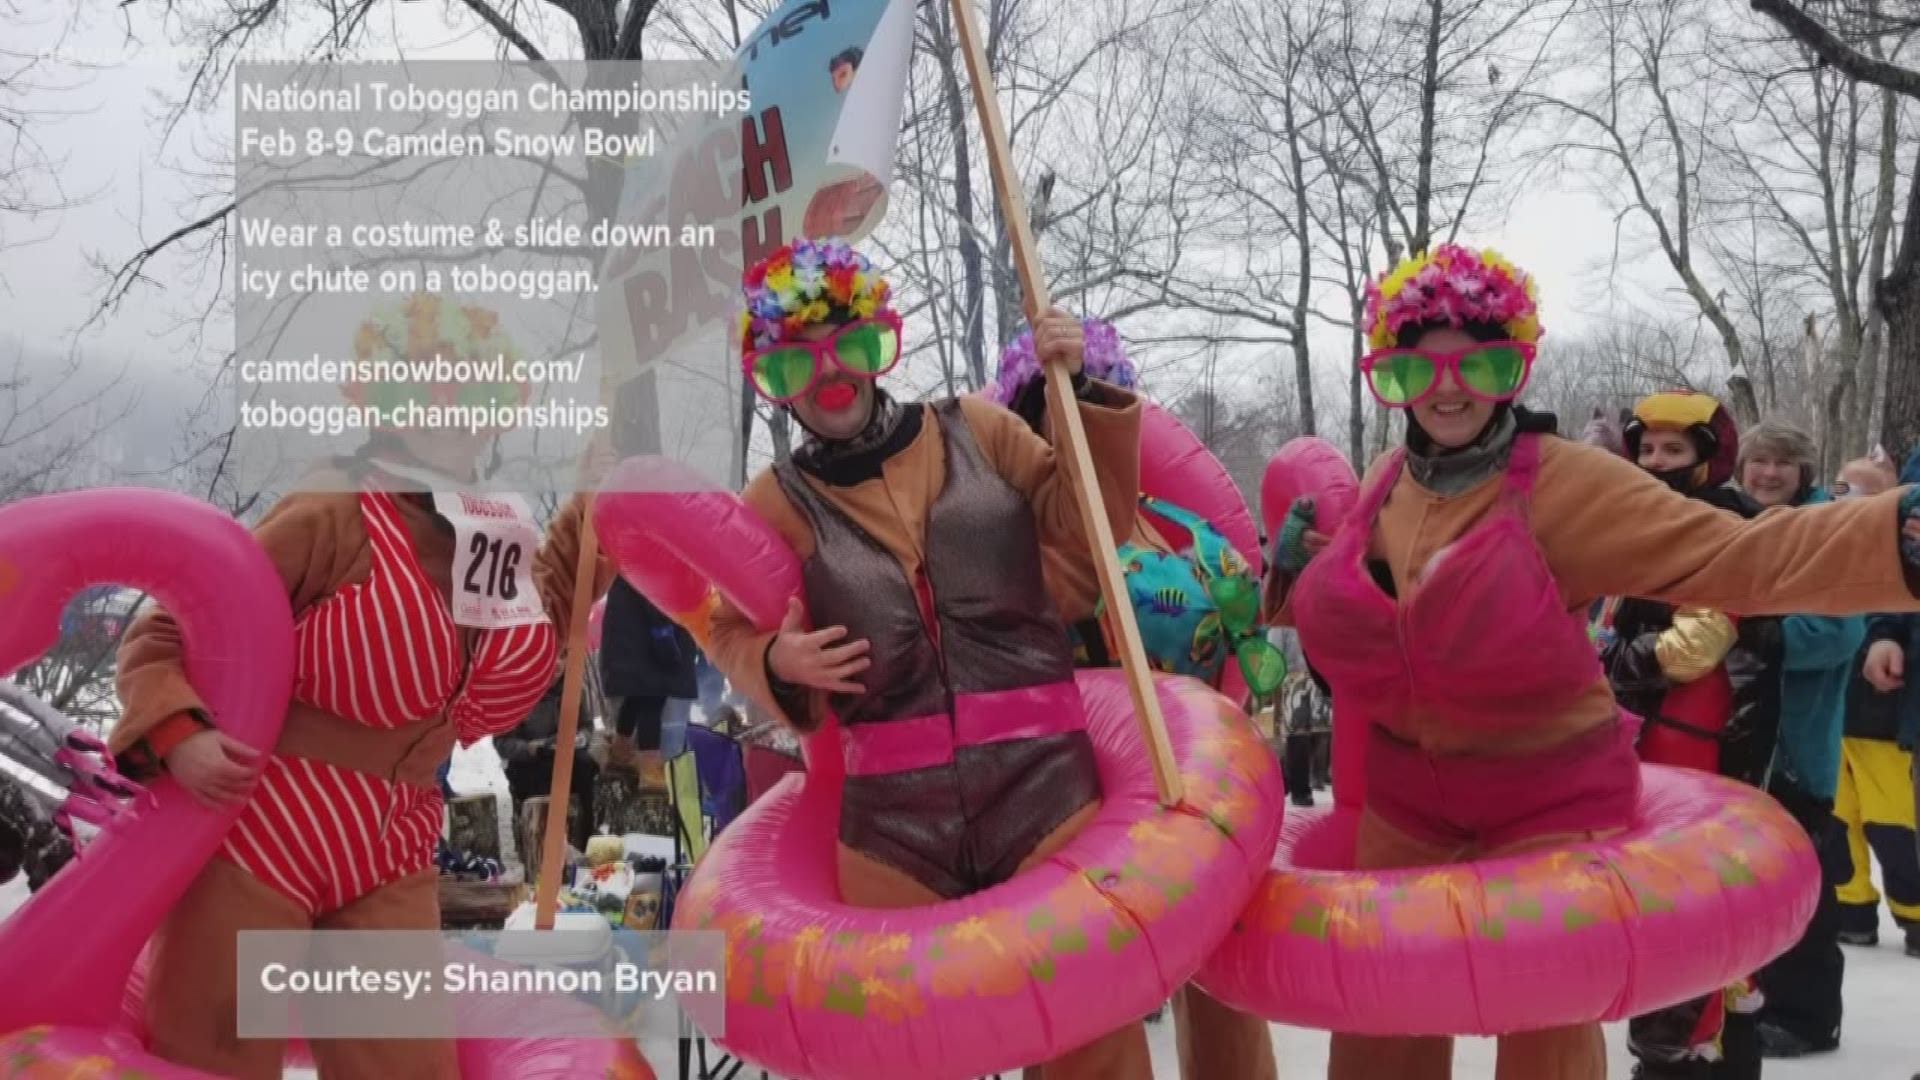 Shannon Bryan from fitmaine.com has some ideas for activities that you can don a costume if you would like.